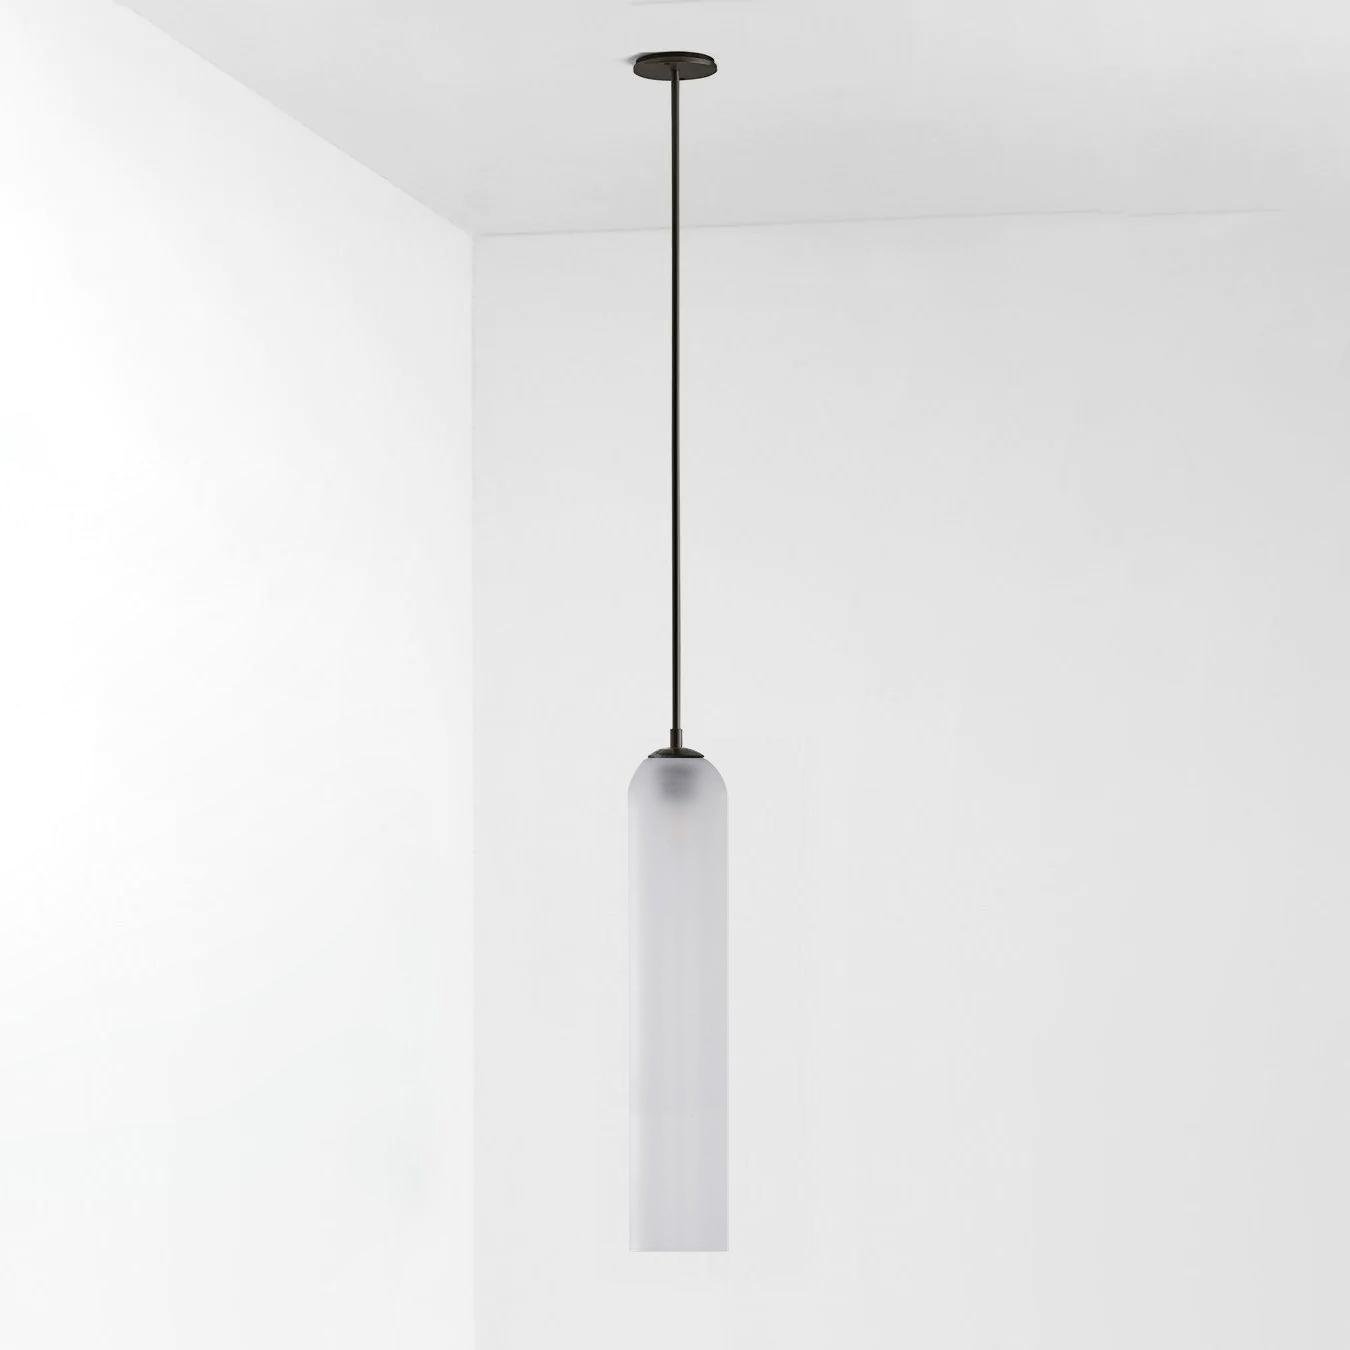 Black Frosted White Long Tube Glass Pendant Light with a Diameter of 10cm and Height of 120cm (3.9 inches x 47.2 inches)